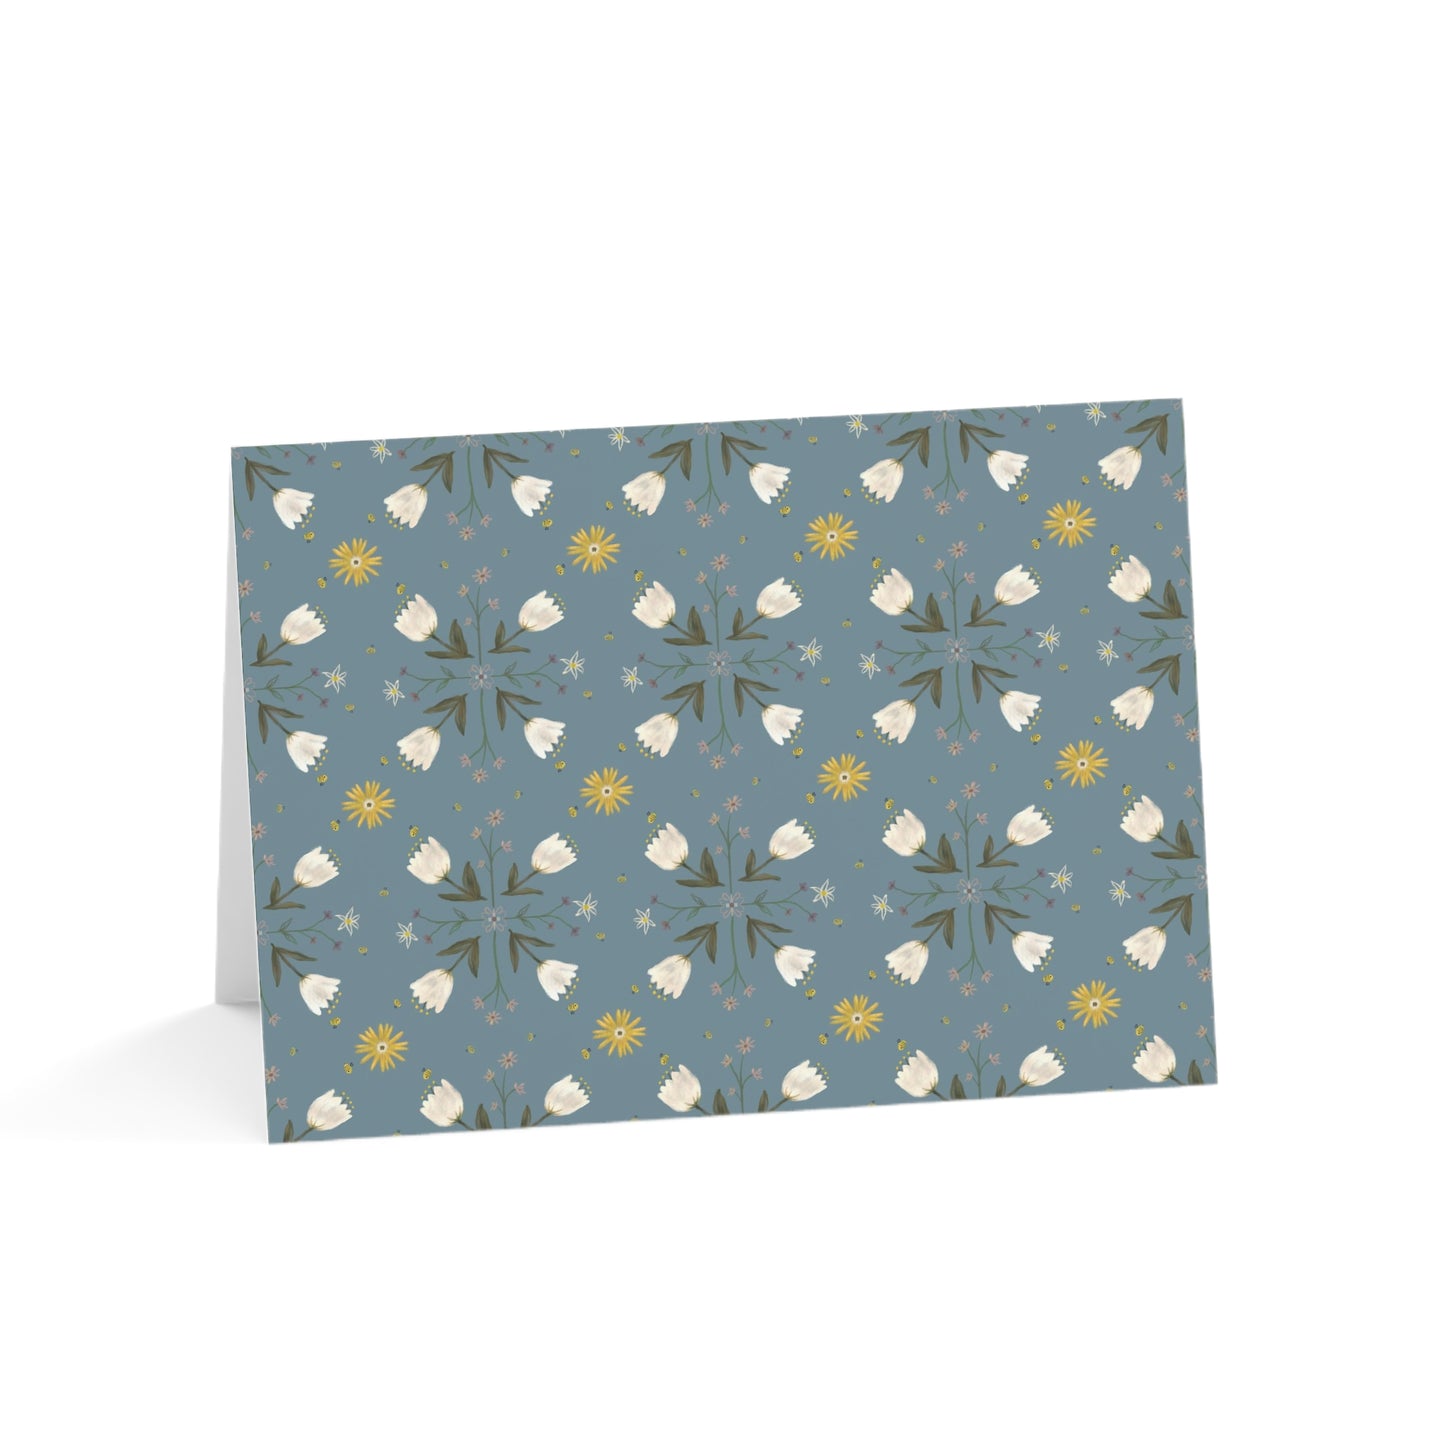 Spring Bees Blue Greeting Cards (1, 10, 30, and 50pcs)